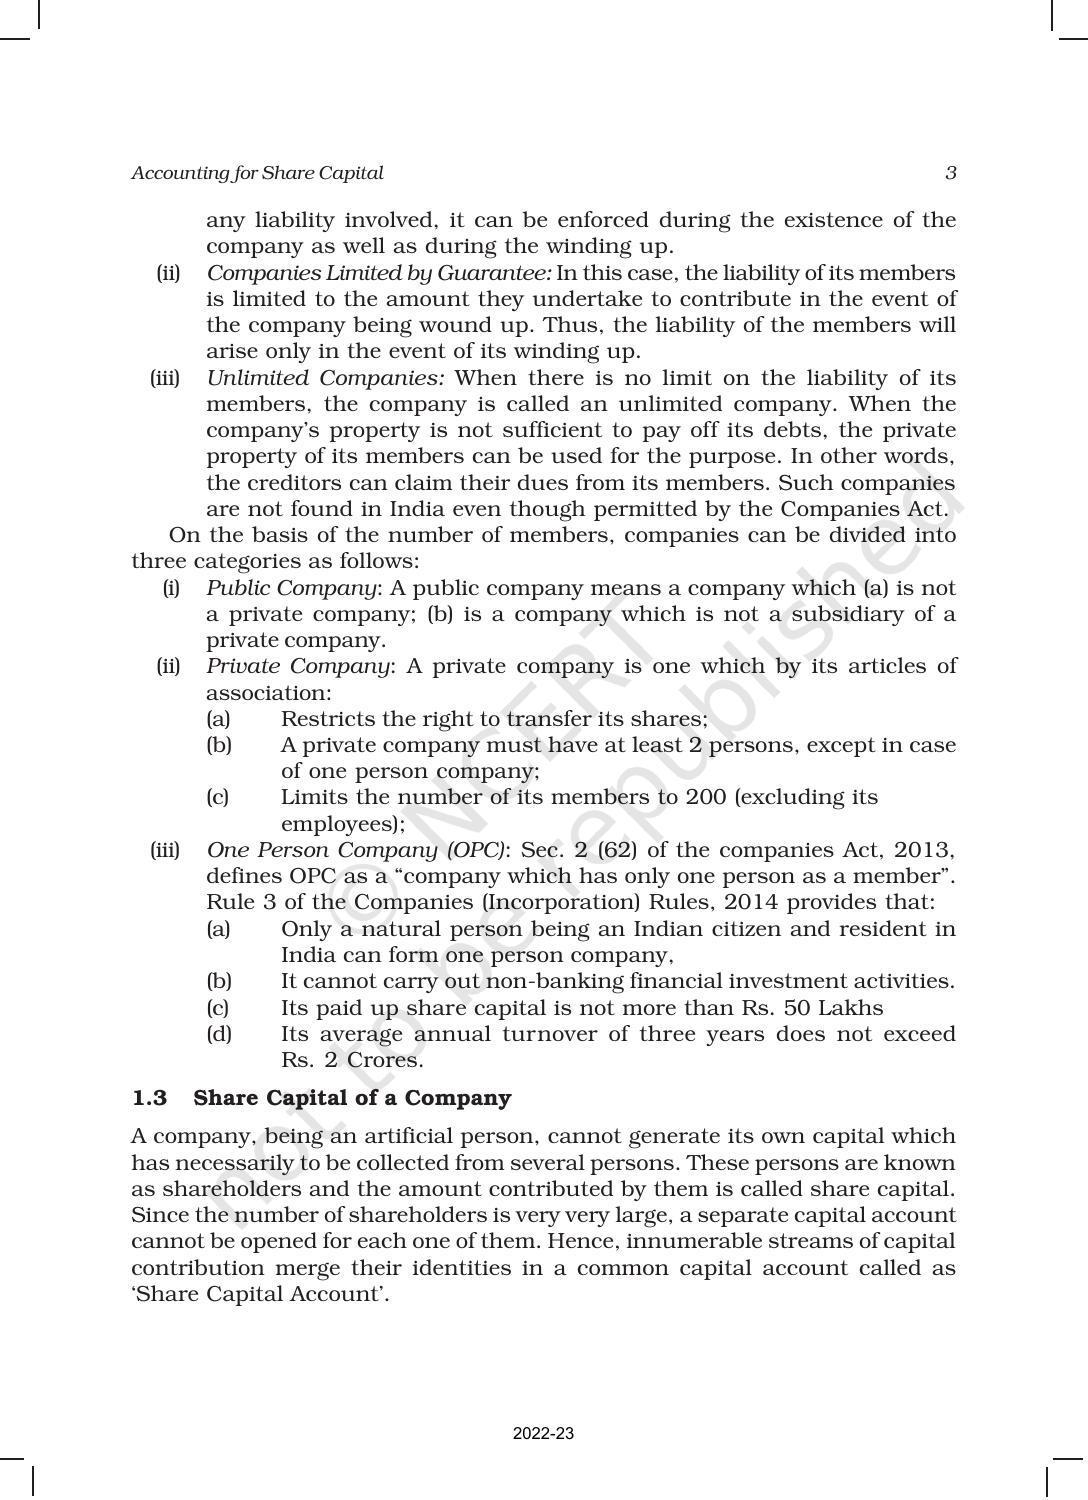 NCERT Book for Class 12 Accountancy Part II Chapter 1 Accounting for Share Capital - Page 3